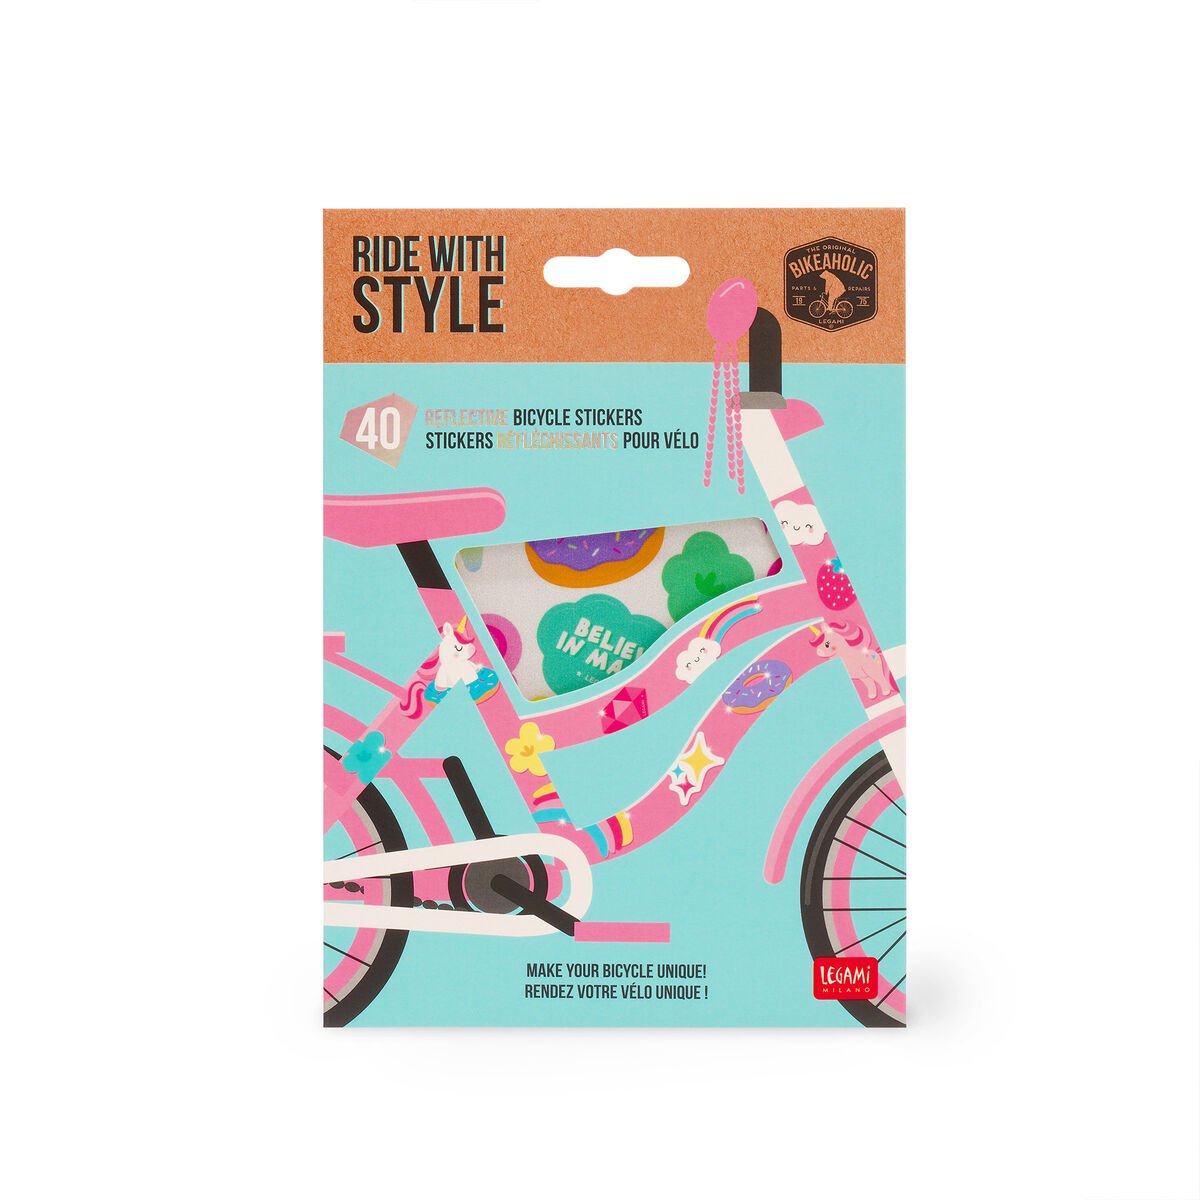 Reflective Bike Stickers - Ride With Style, , zoo